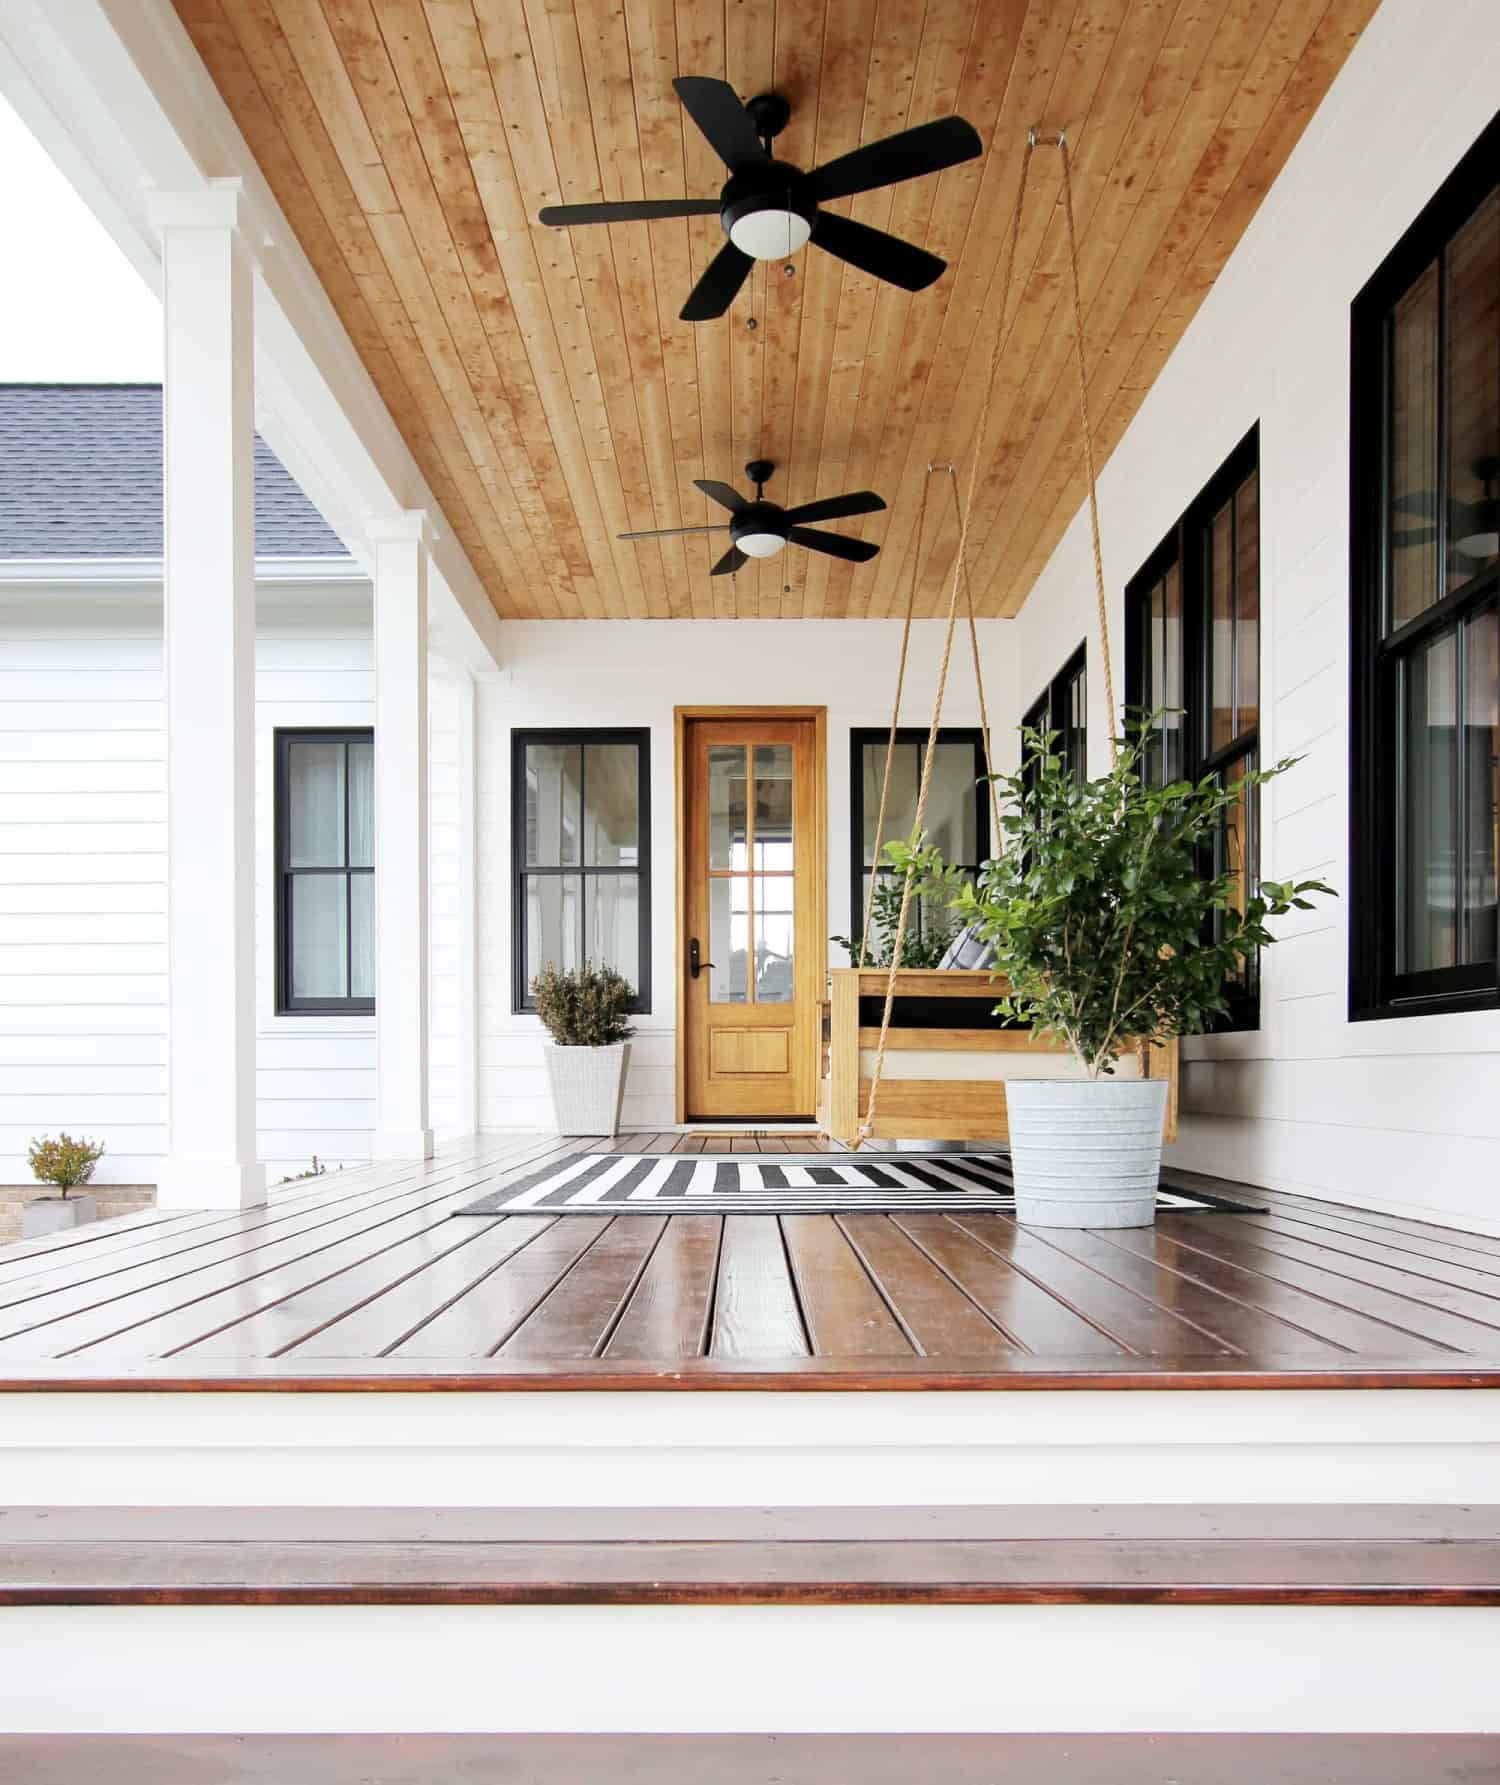 Side view of a modern farmhouse porch. The porch is decorated with a simple black and white rug, plants in white planters and a large porch swing.